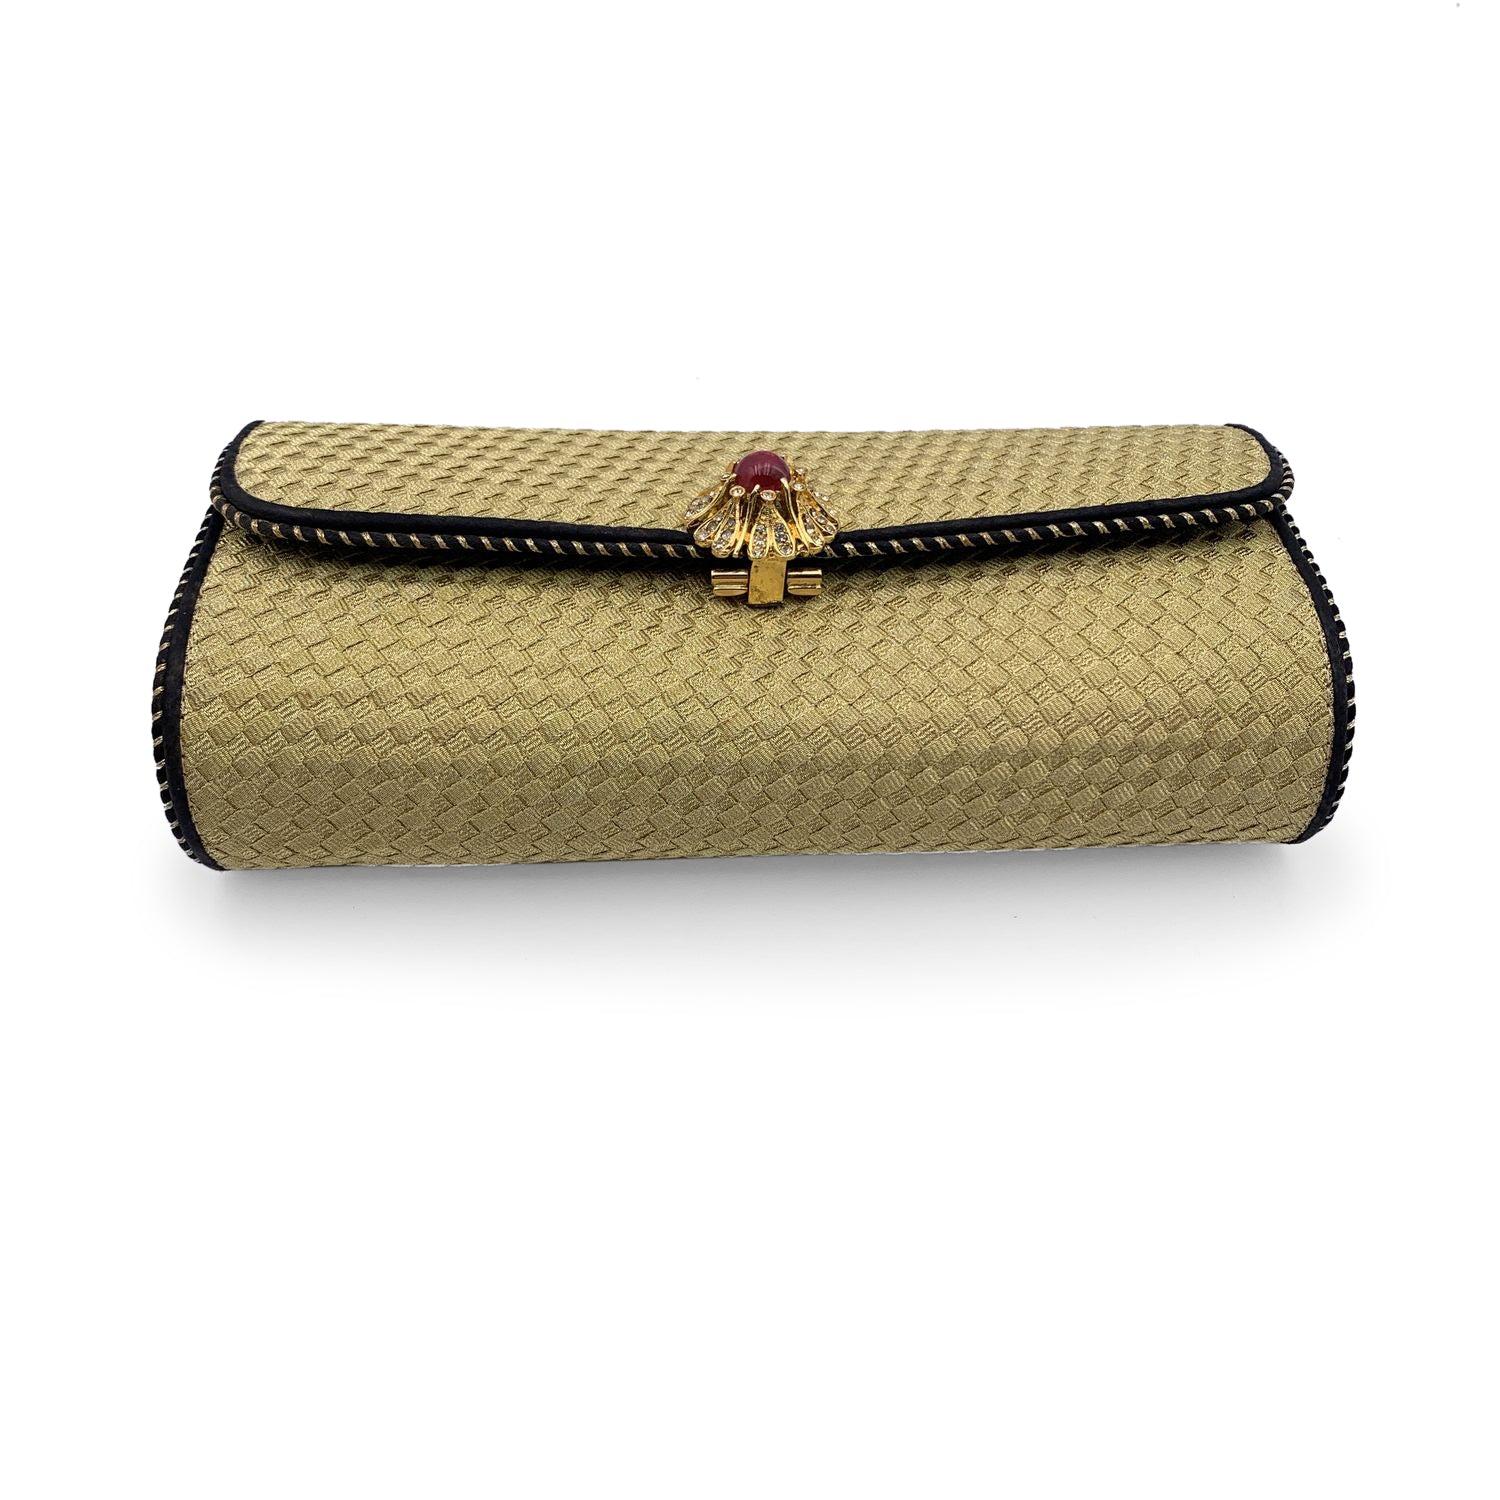 Bottega Veneta Vintage Woven Fabric Jeweled Evening Clutch Bag In Excellent Condition In Rome, Rome